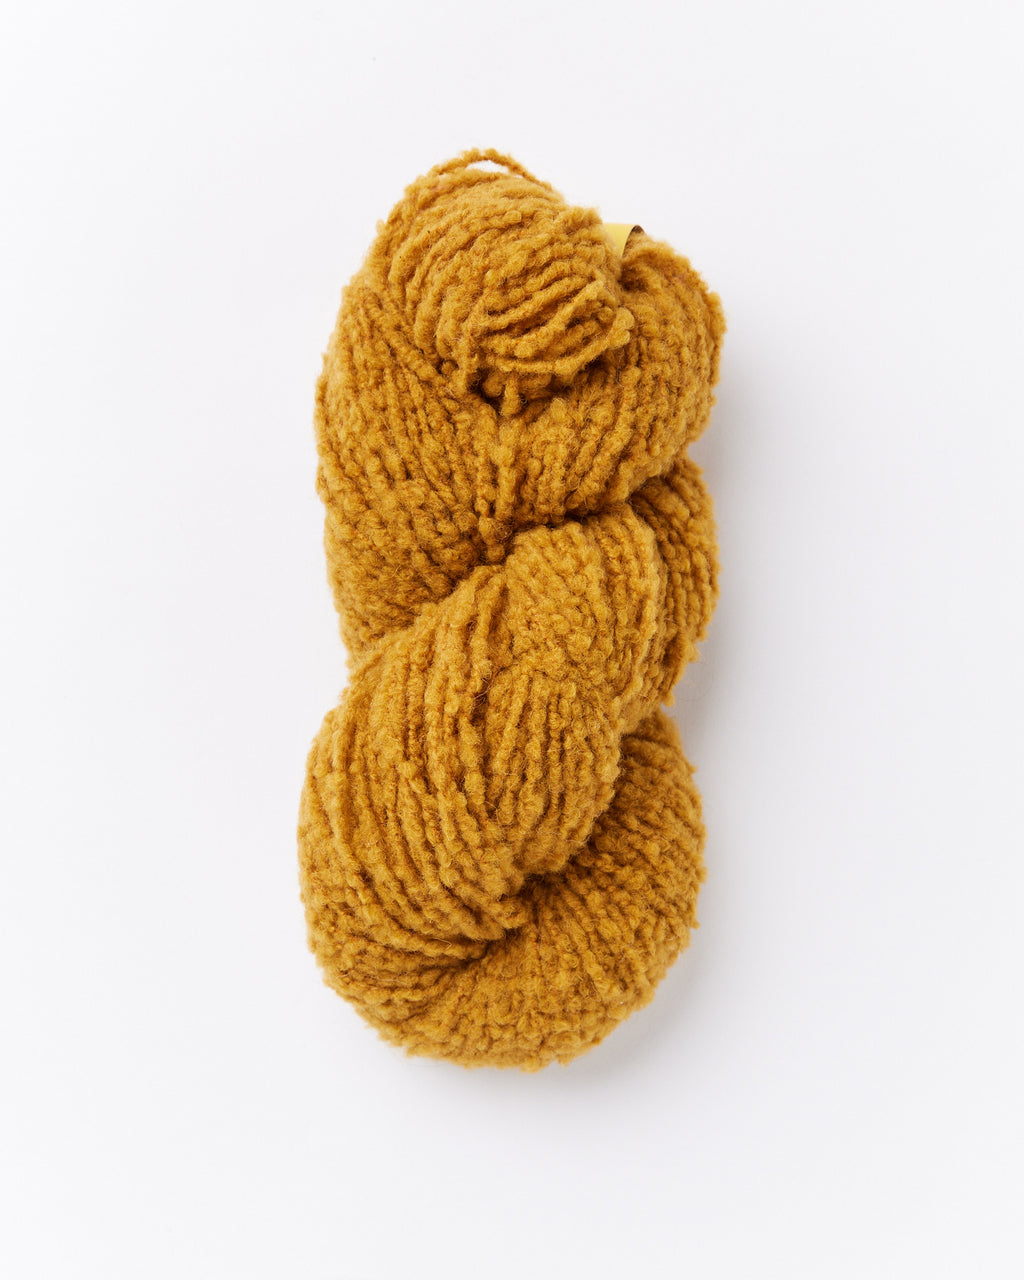 Knit Collage Serenity Boucle Yarn Marigold